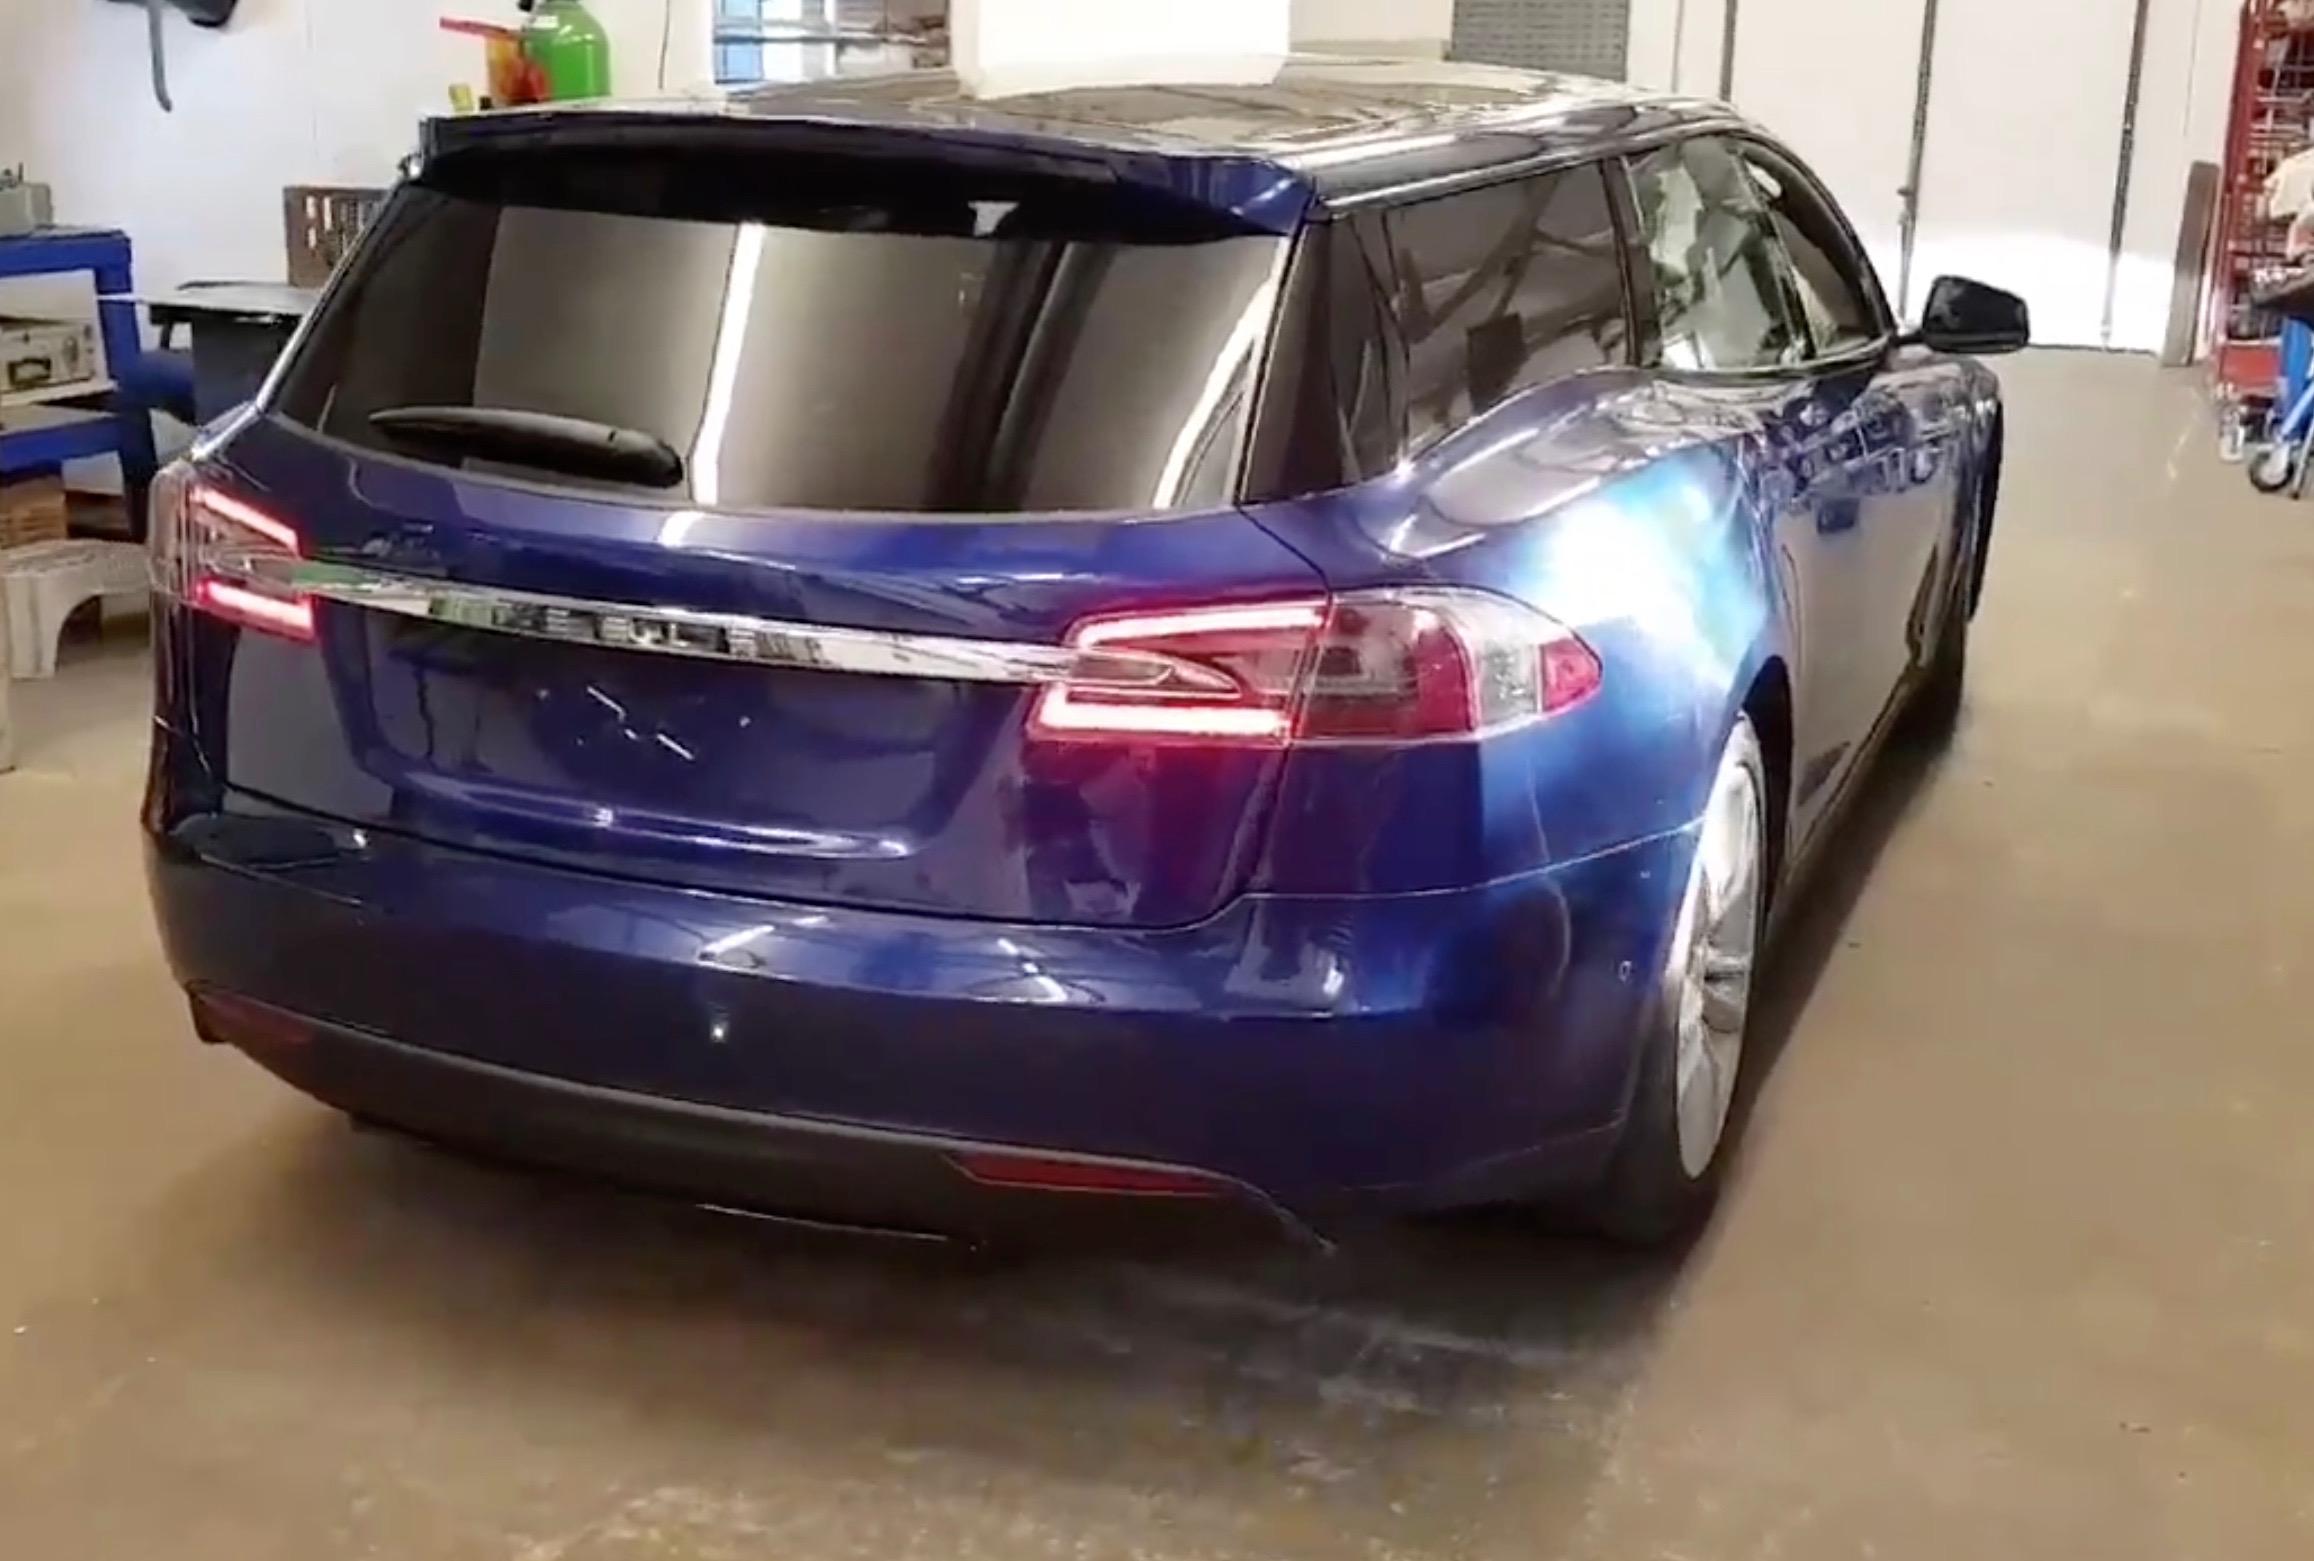 Tesla Model S wagon project complete, looks weird (video)